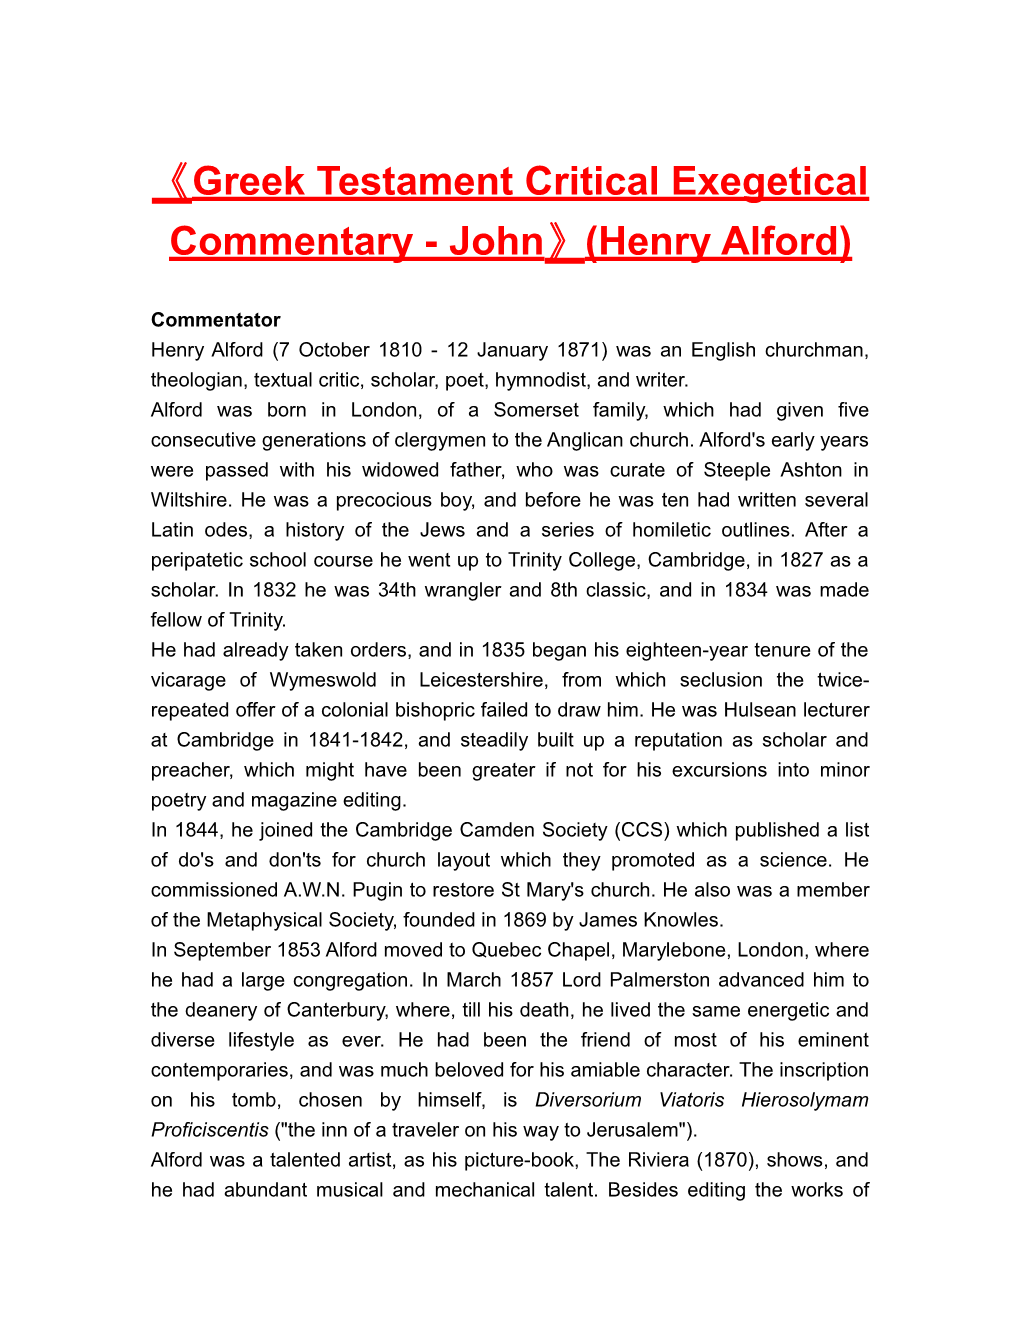 Greektestament Critical Exegetical Commentary-John (Henry Alford)